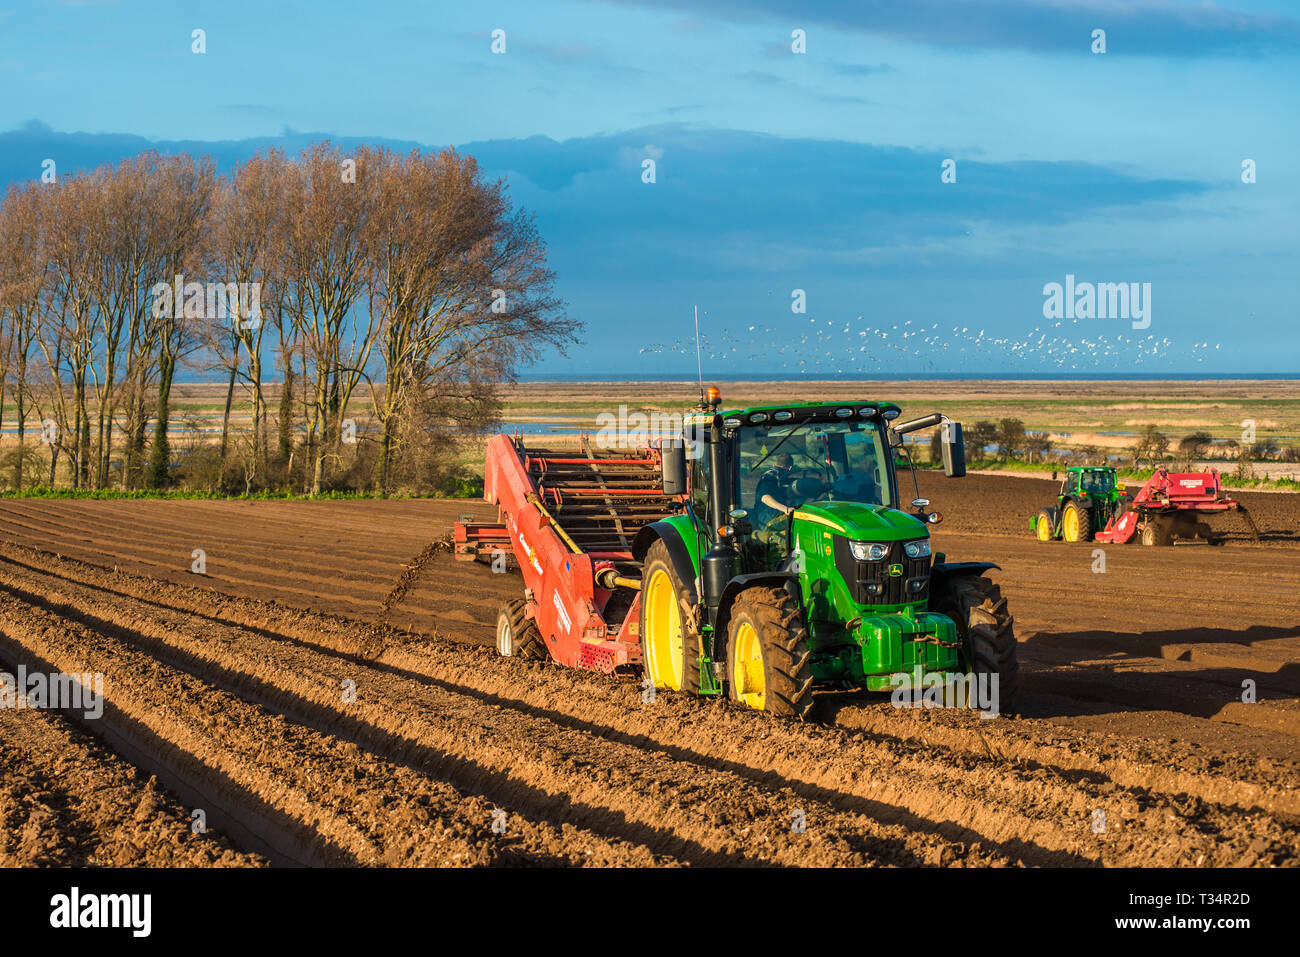 Tractors carrying out deep bed shaping followed by sowing the fields in early springs time at Burnham Overy in North Norfolk, East Anglia, England, UK Stock Photo